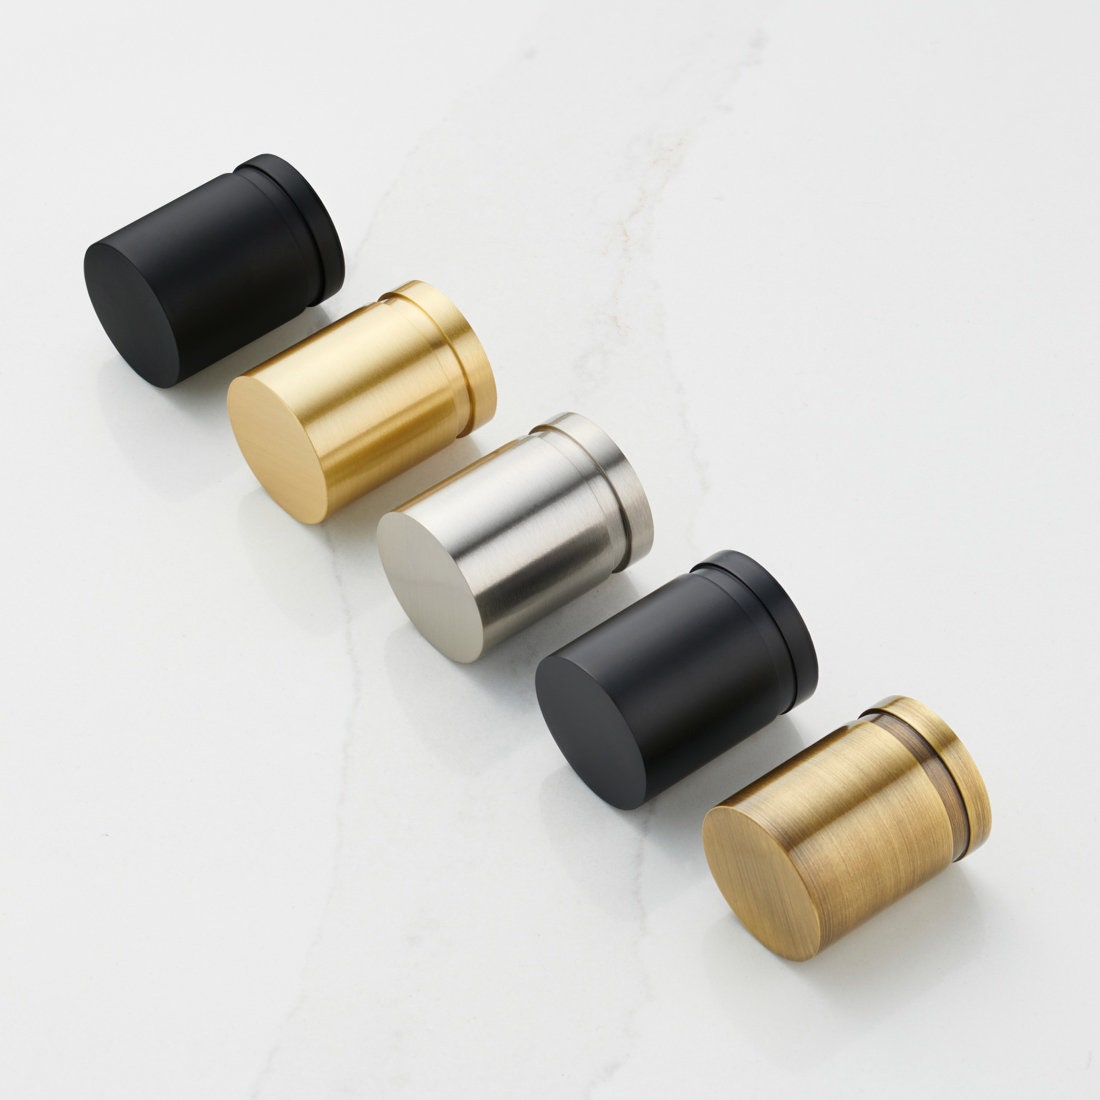 Buy Cylinder Cabinet Pulls Solid Brass Gold Copper Silver Online